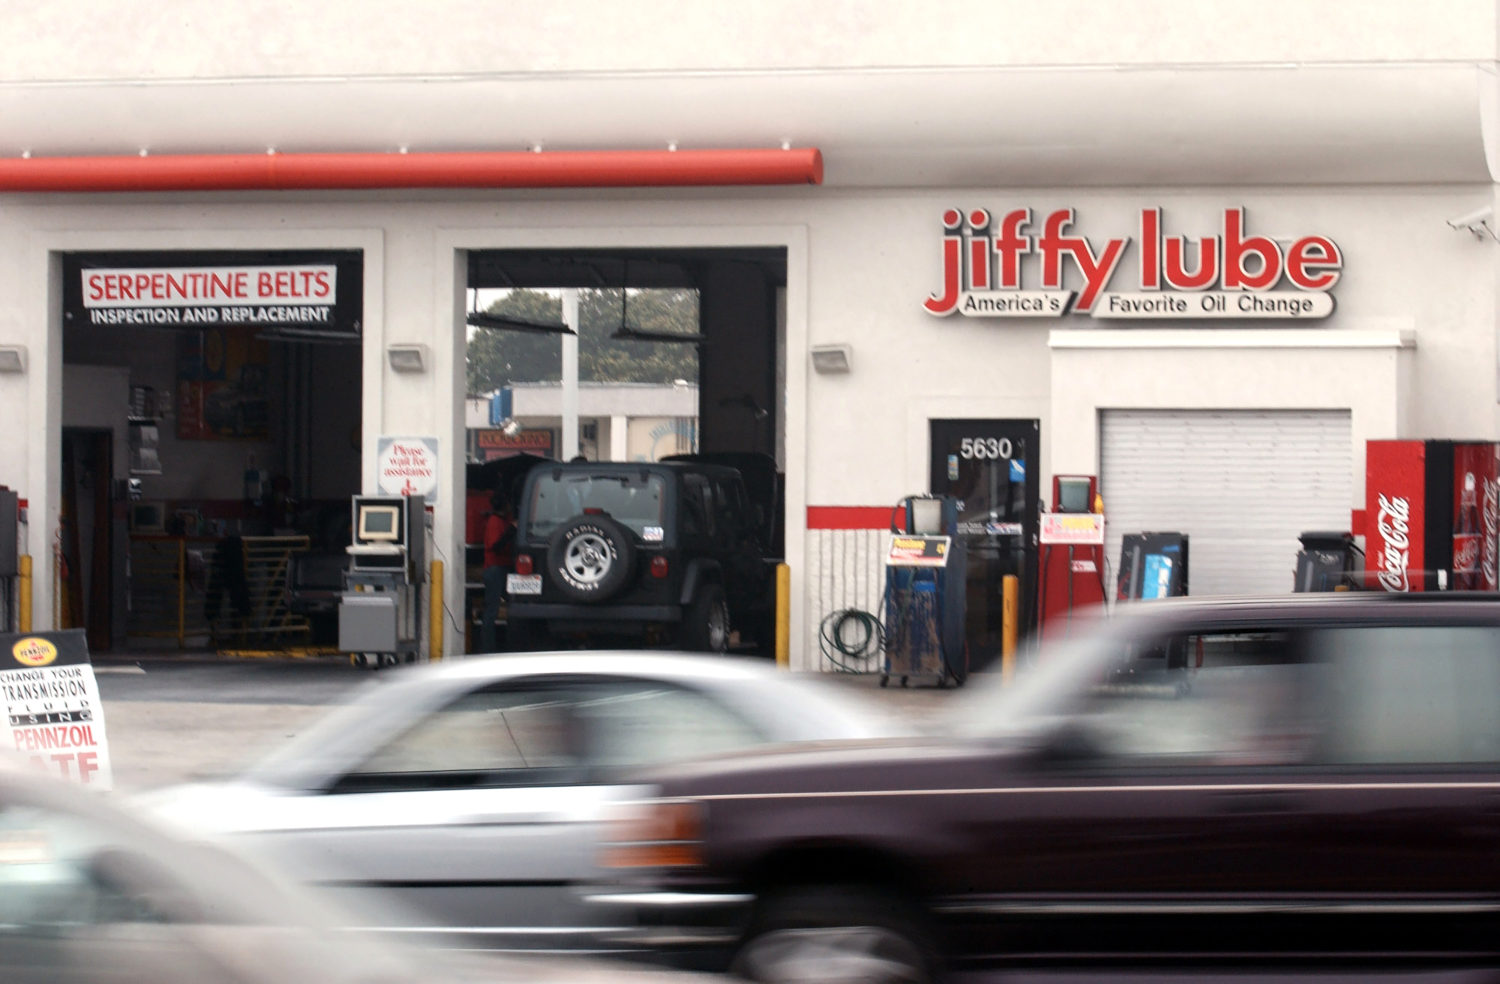 If you car is burning oil, take it to a mechanic shop like this